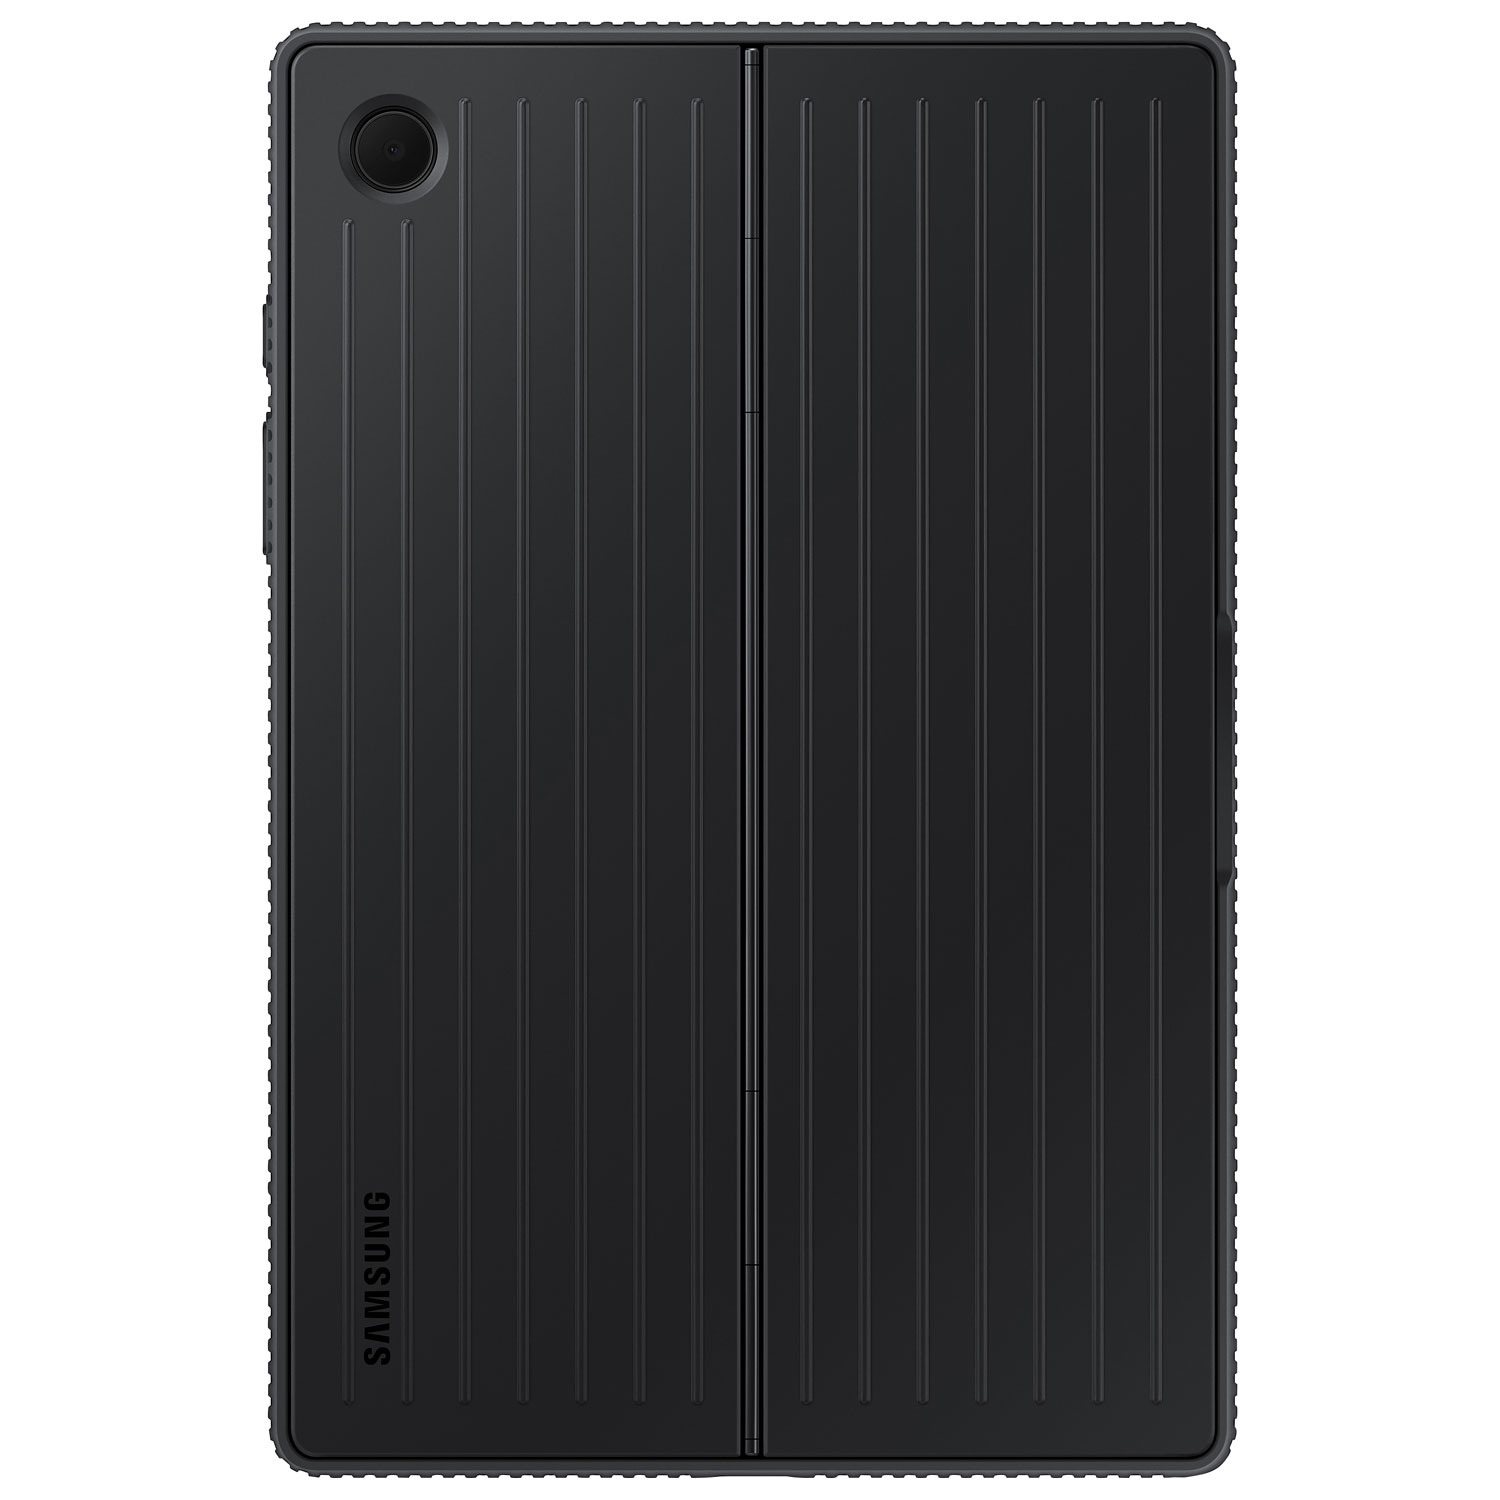 Samsung Protective Cover Case for Galaxy Tab A8 - Black